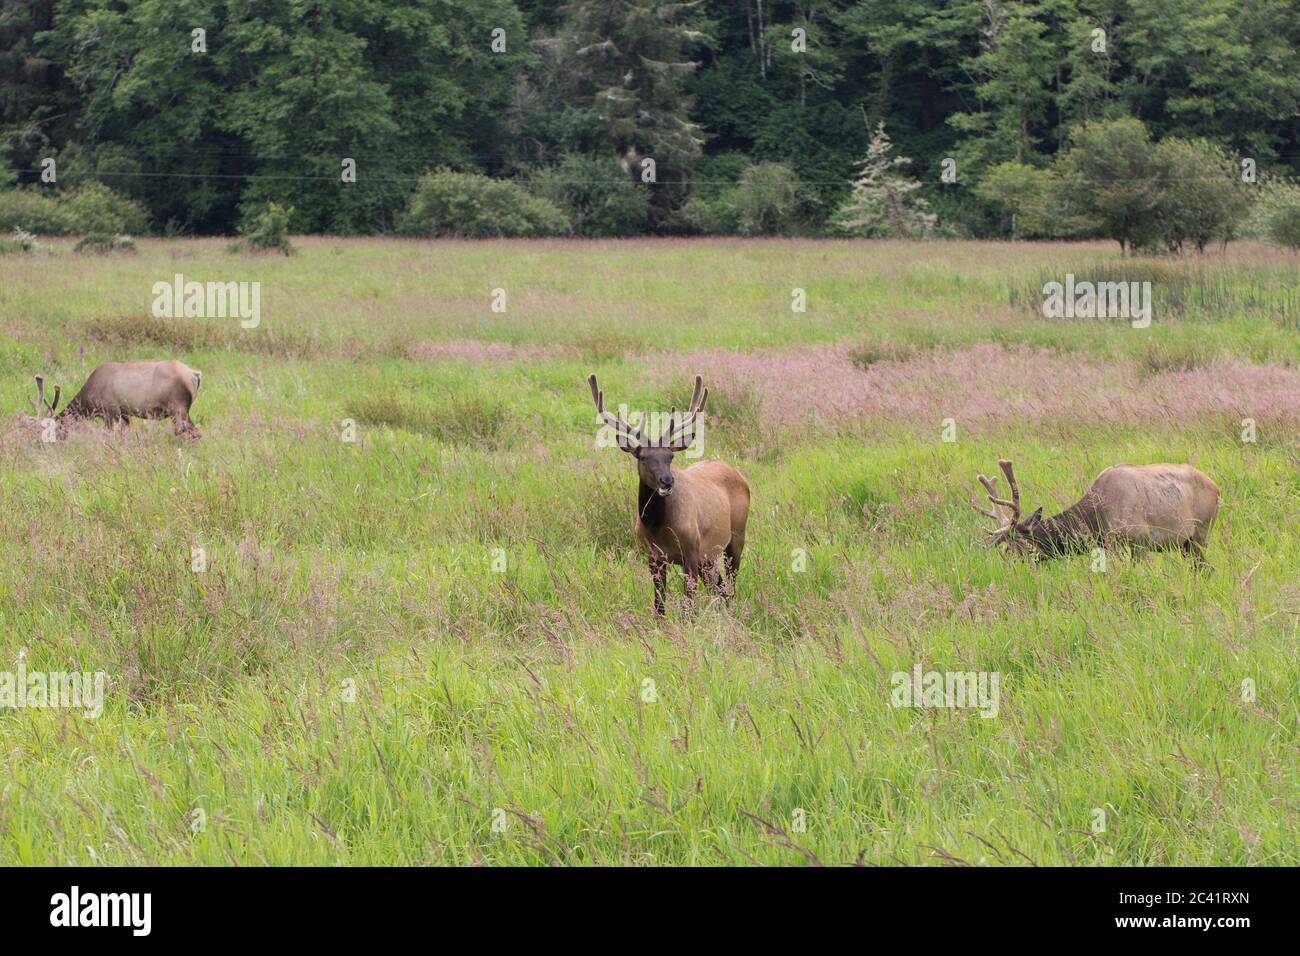 Elk in a field near Coos Bay, Oregon, USA. Stock Photo